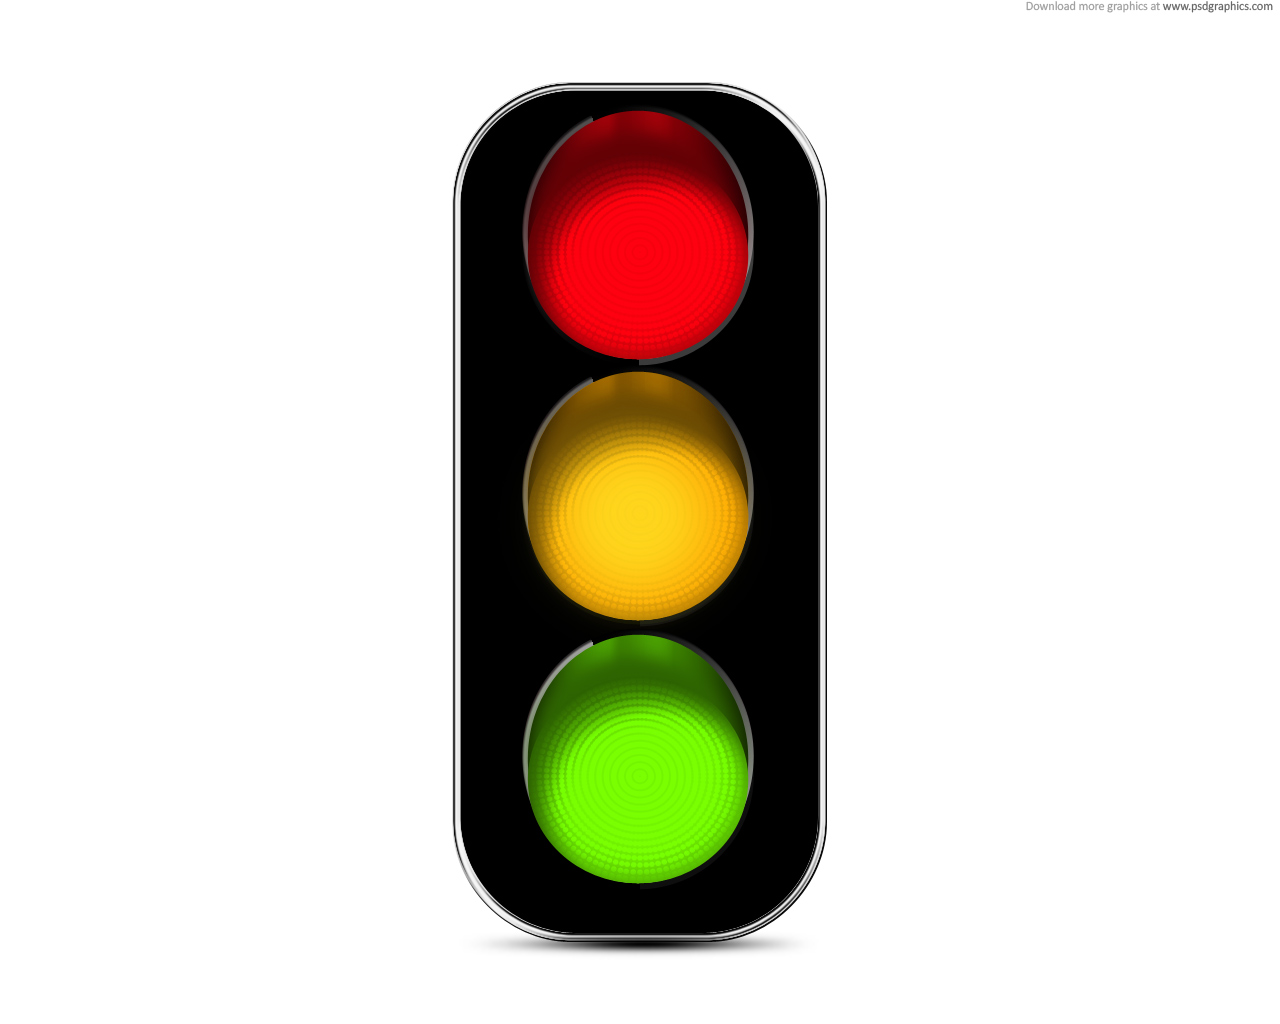 Red Stop Light - ClipArt Best